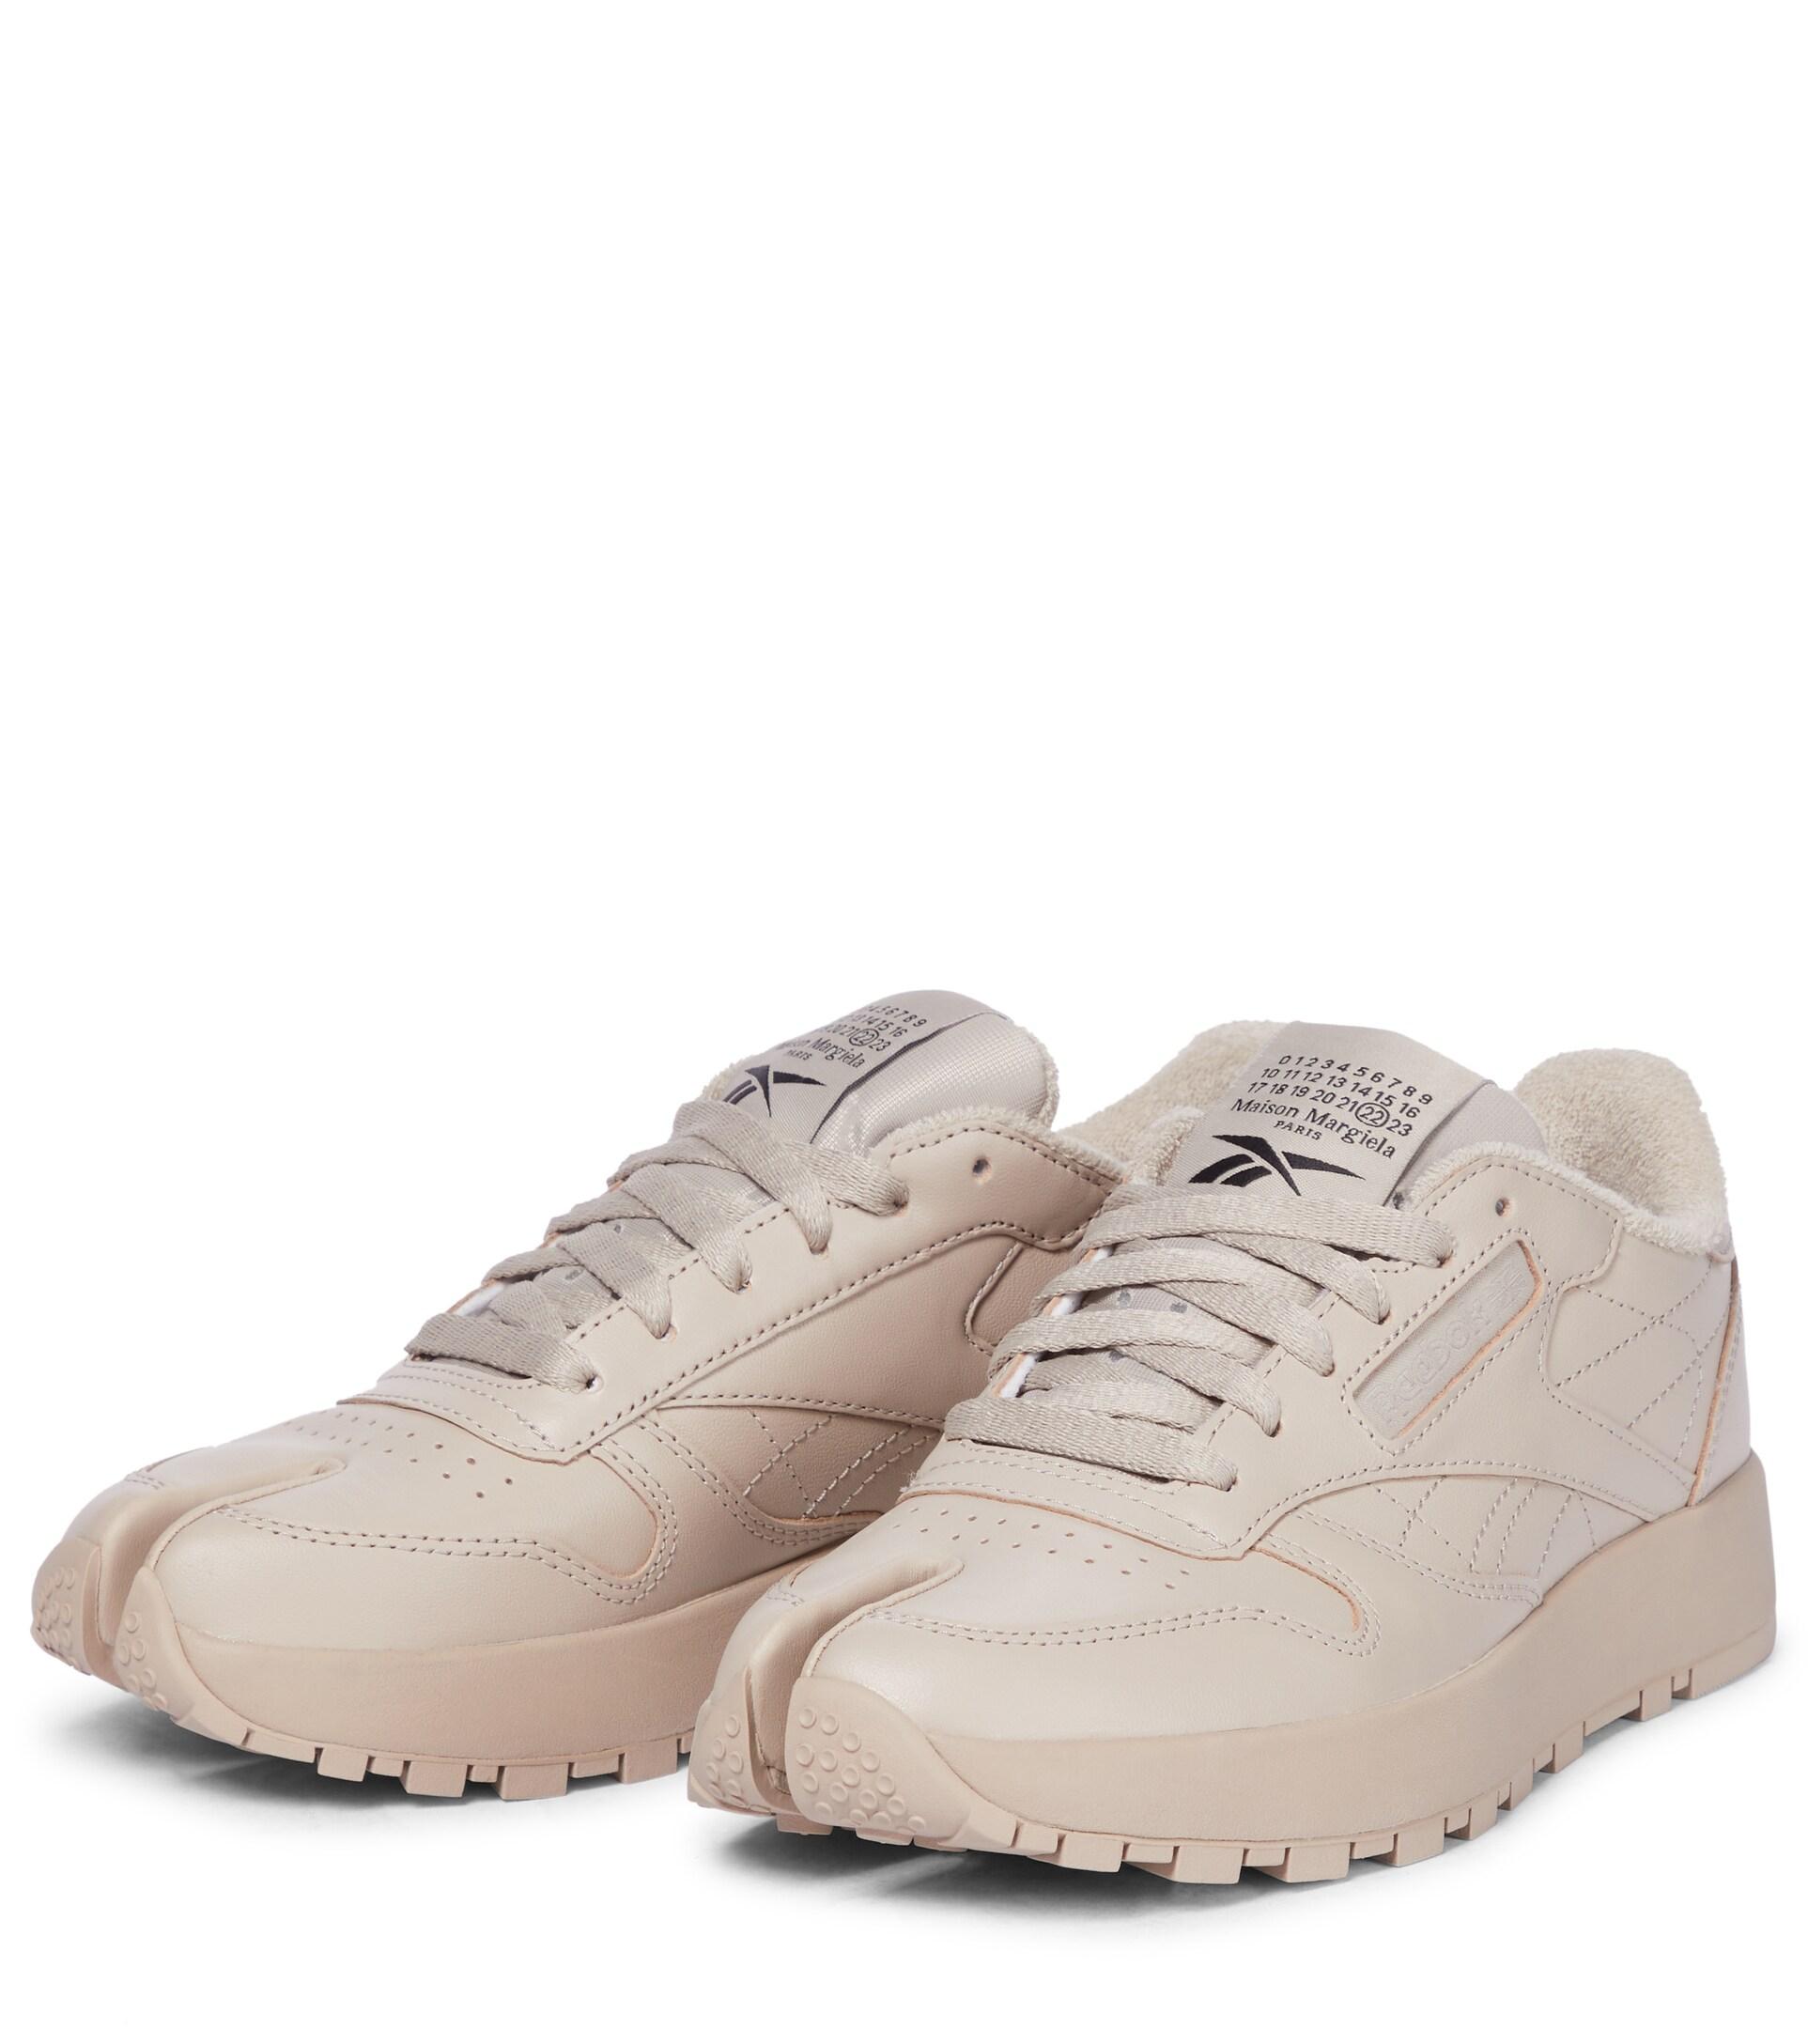 Maison Margiela X Reebok Classic Tabi Leather Sneakers in Natural | Lyst